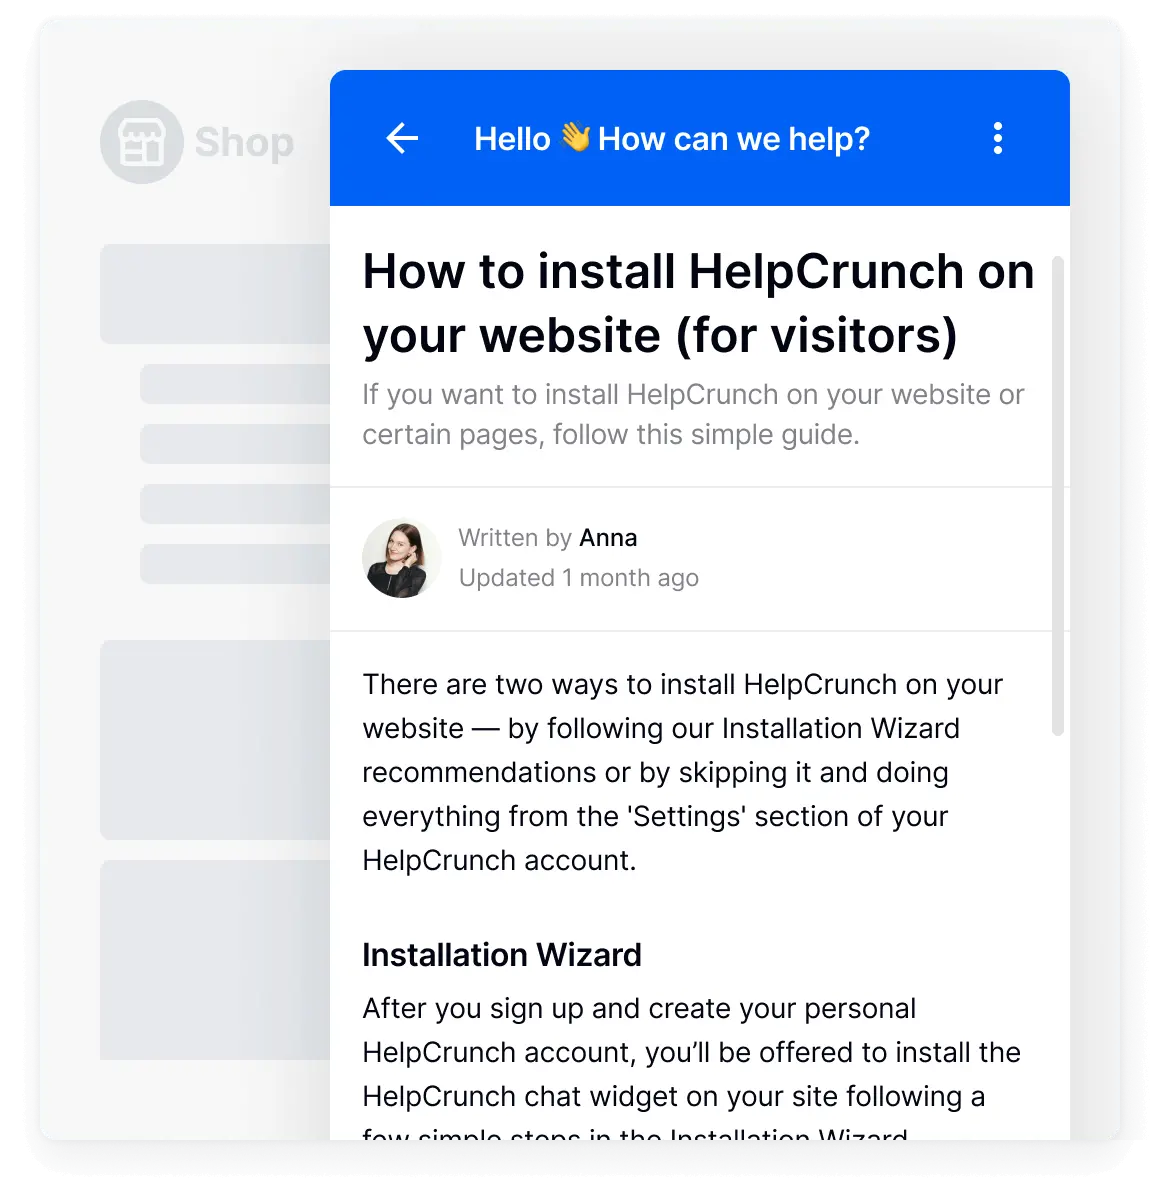 Knowledge base built into a live chat widget by HelpCrunch